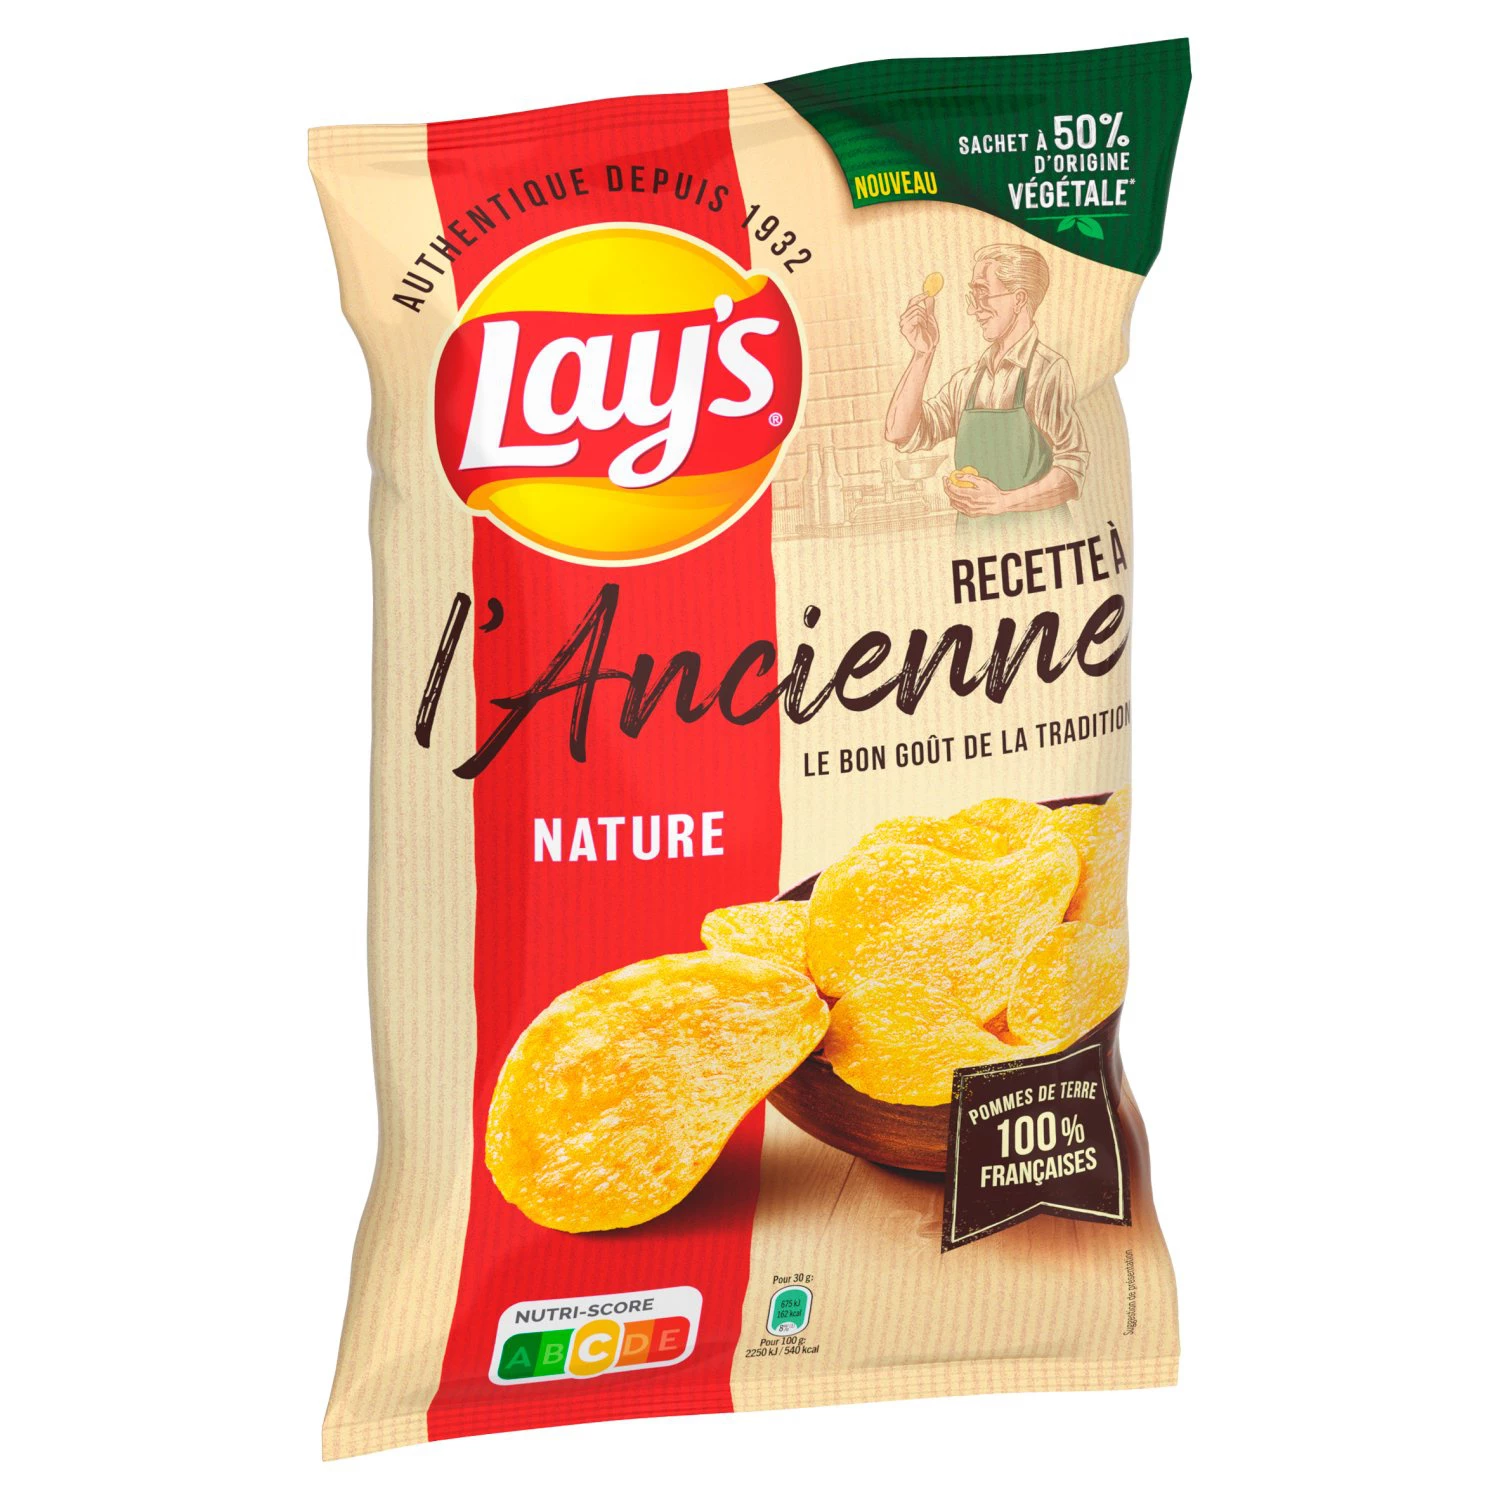 Oude Natuurchips, 155g - LAY'S